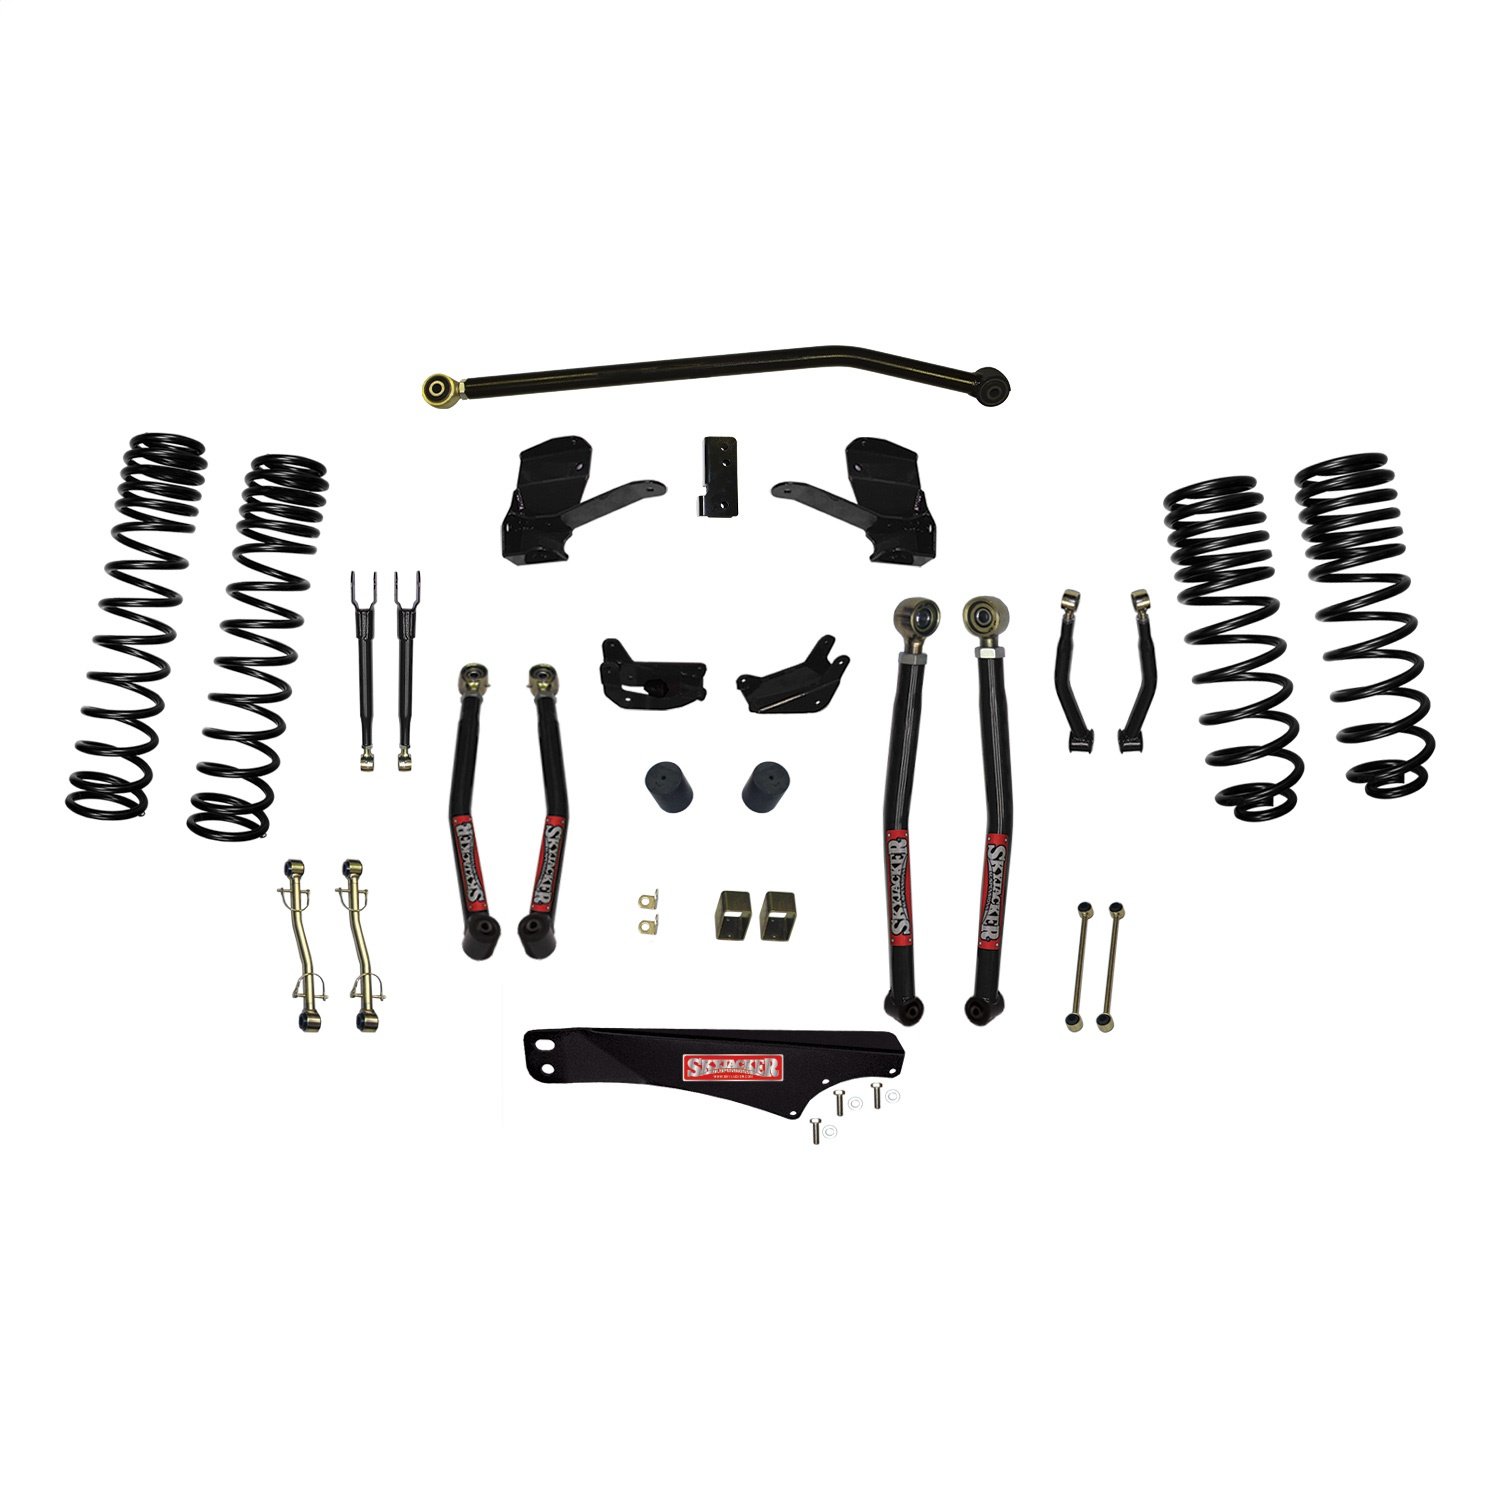 JK40LKLT-SX Front and Rear Suspension Lift Kit, Lift Amount: 4 in. Front/4 in. Rear